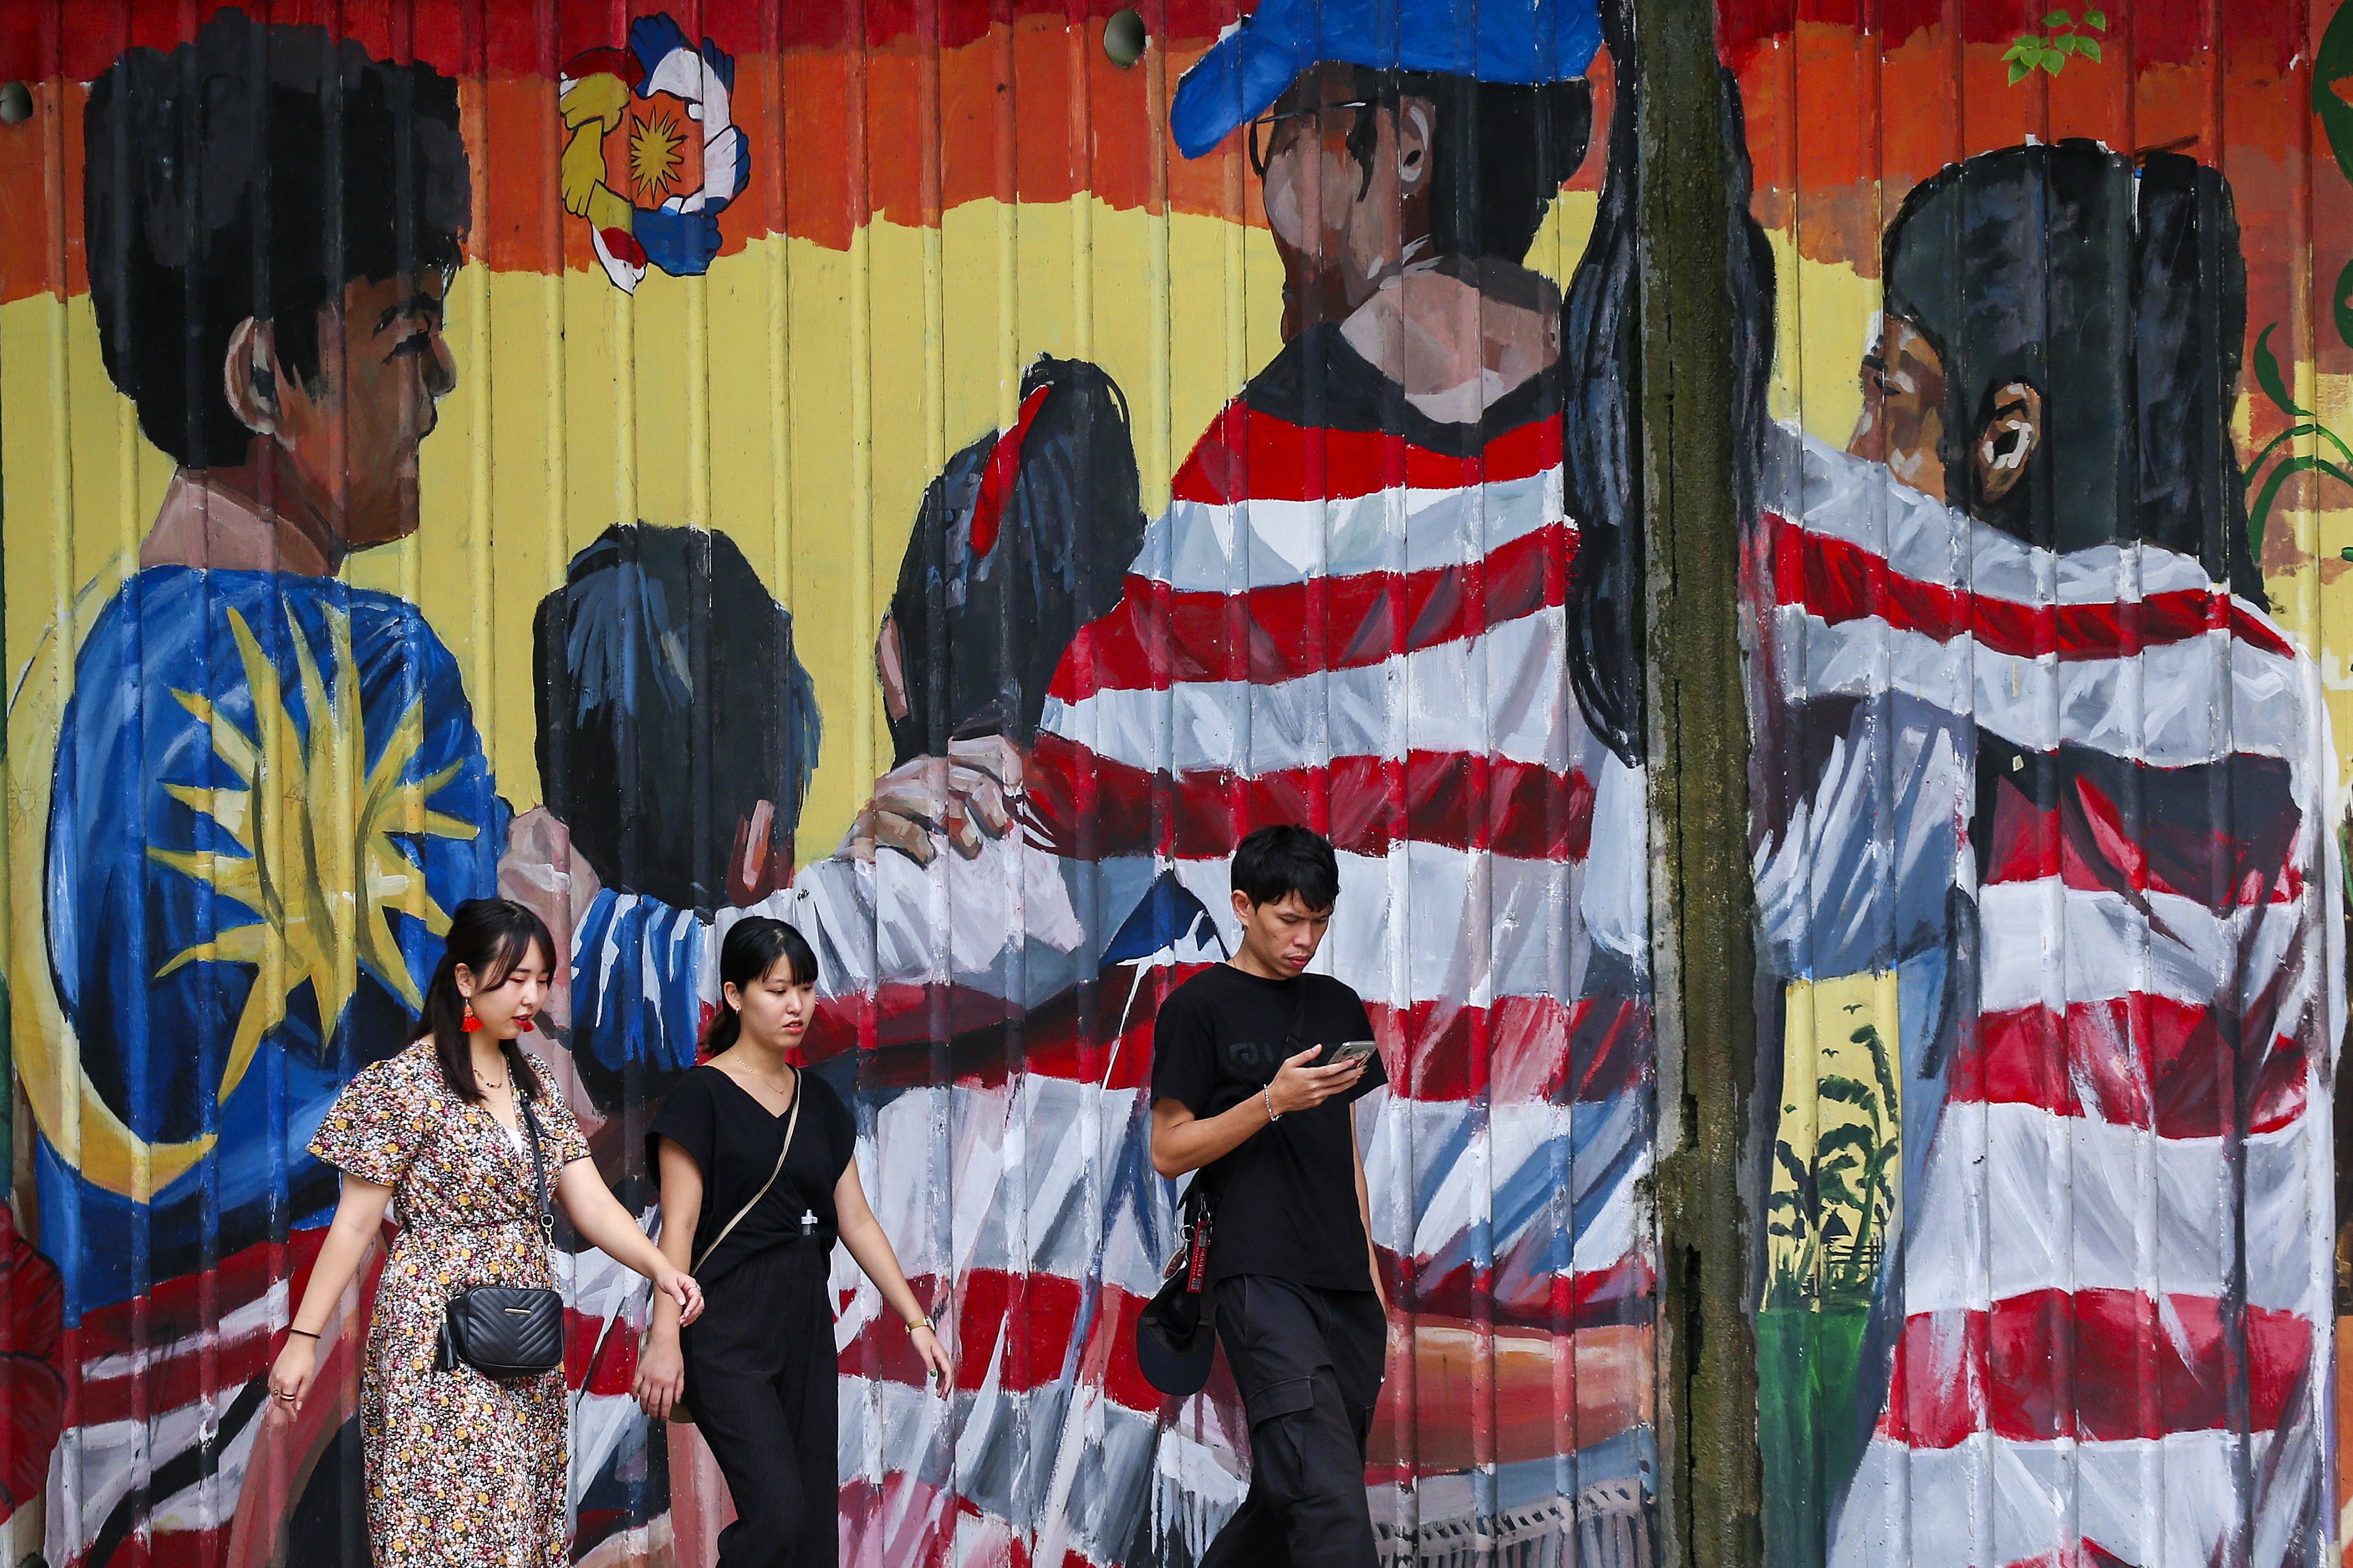 People walk past a mural featuring the Malaysian flag in Kuala Lumpur. Malaysia is eyeing regional leadership in cloud computing, machine learning and as a gateway for global tech start-ups. Photo: EPA-EFE